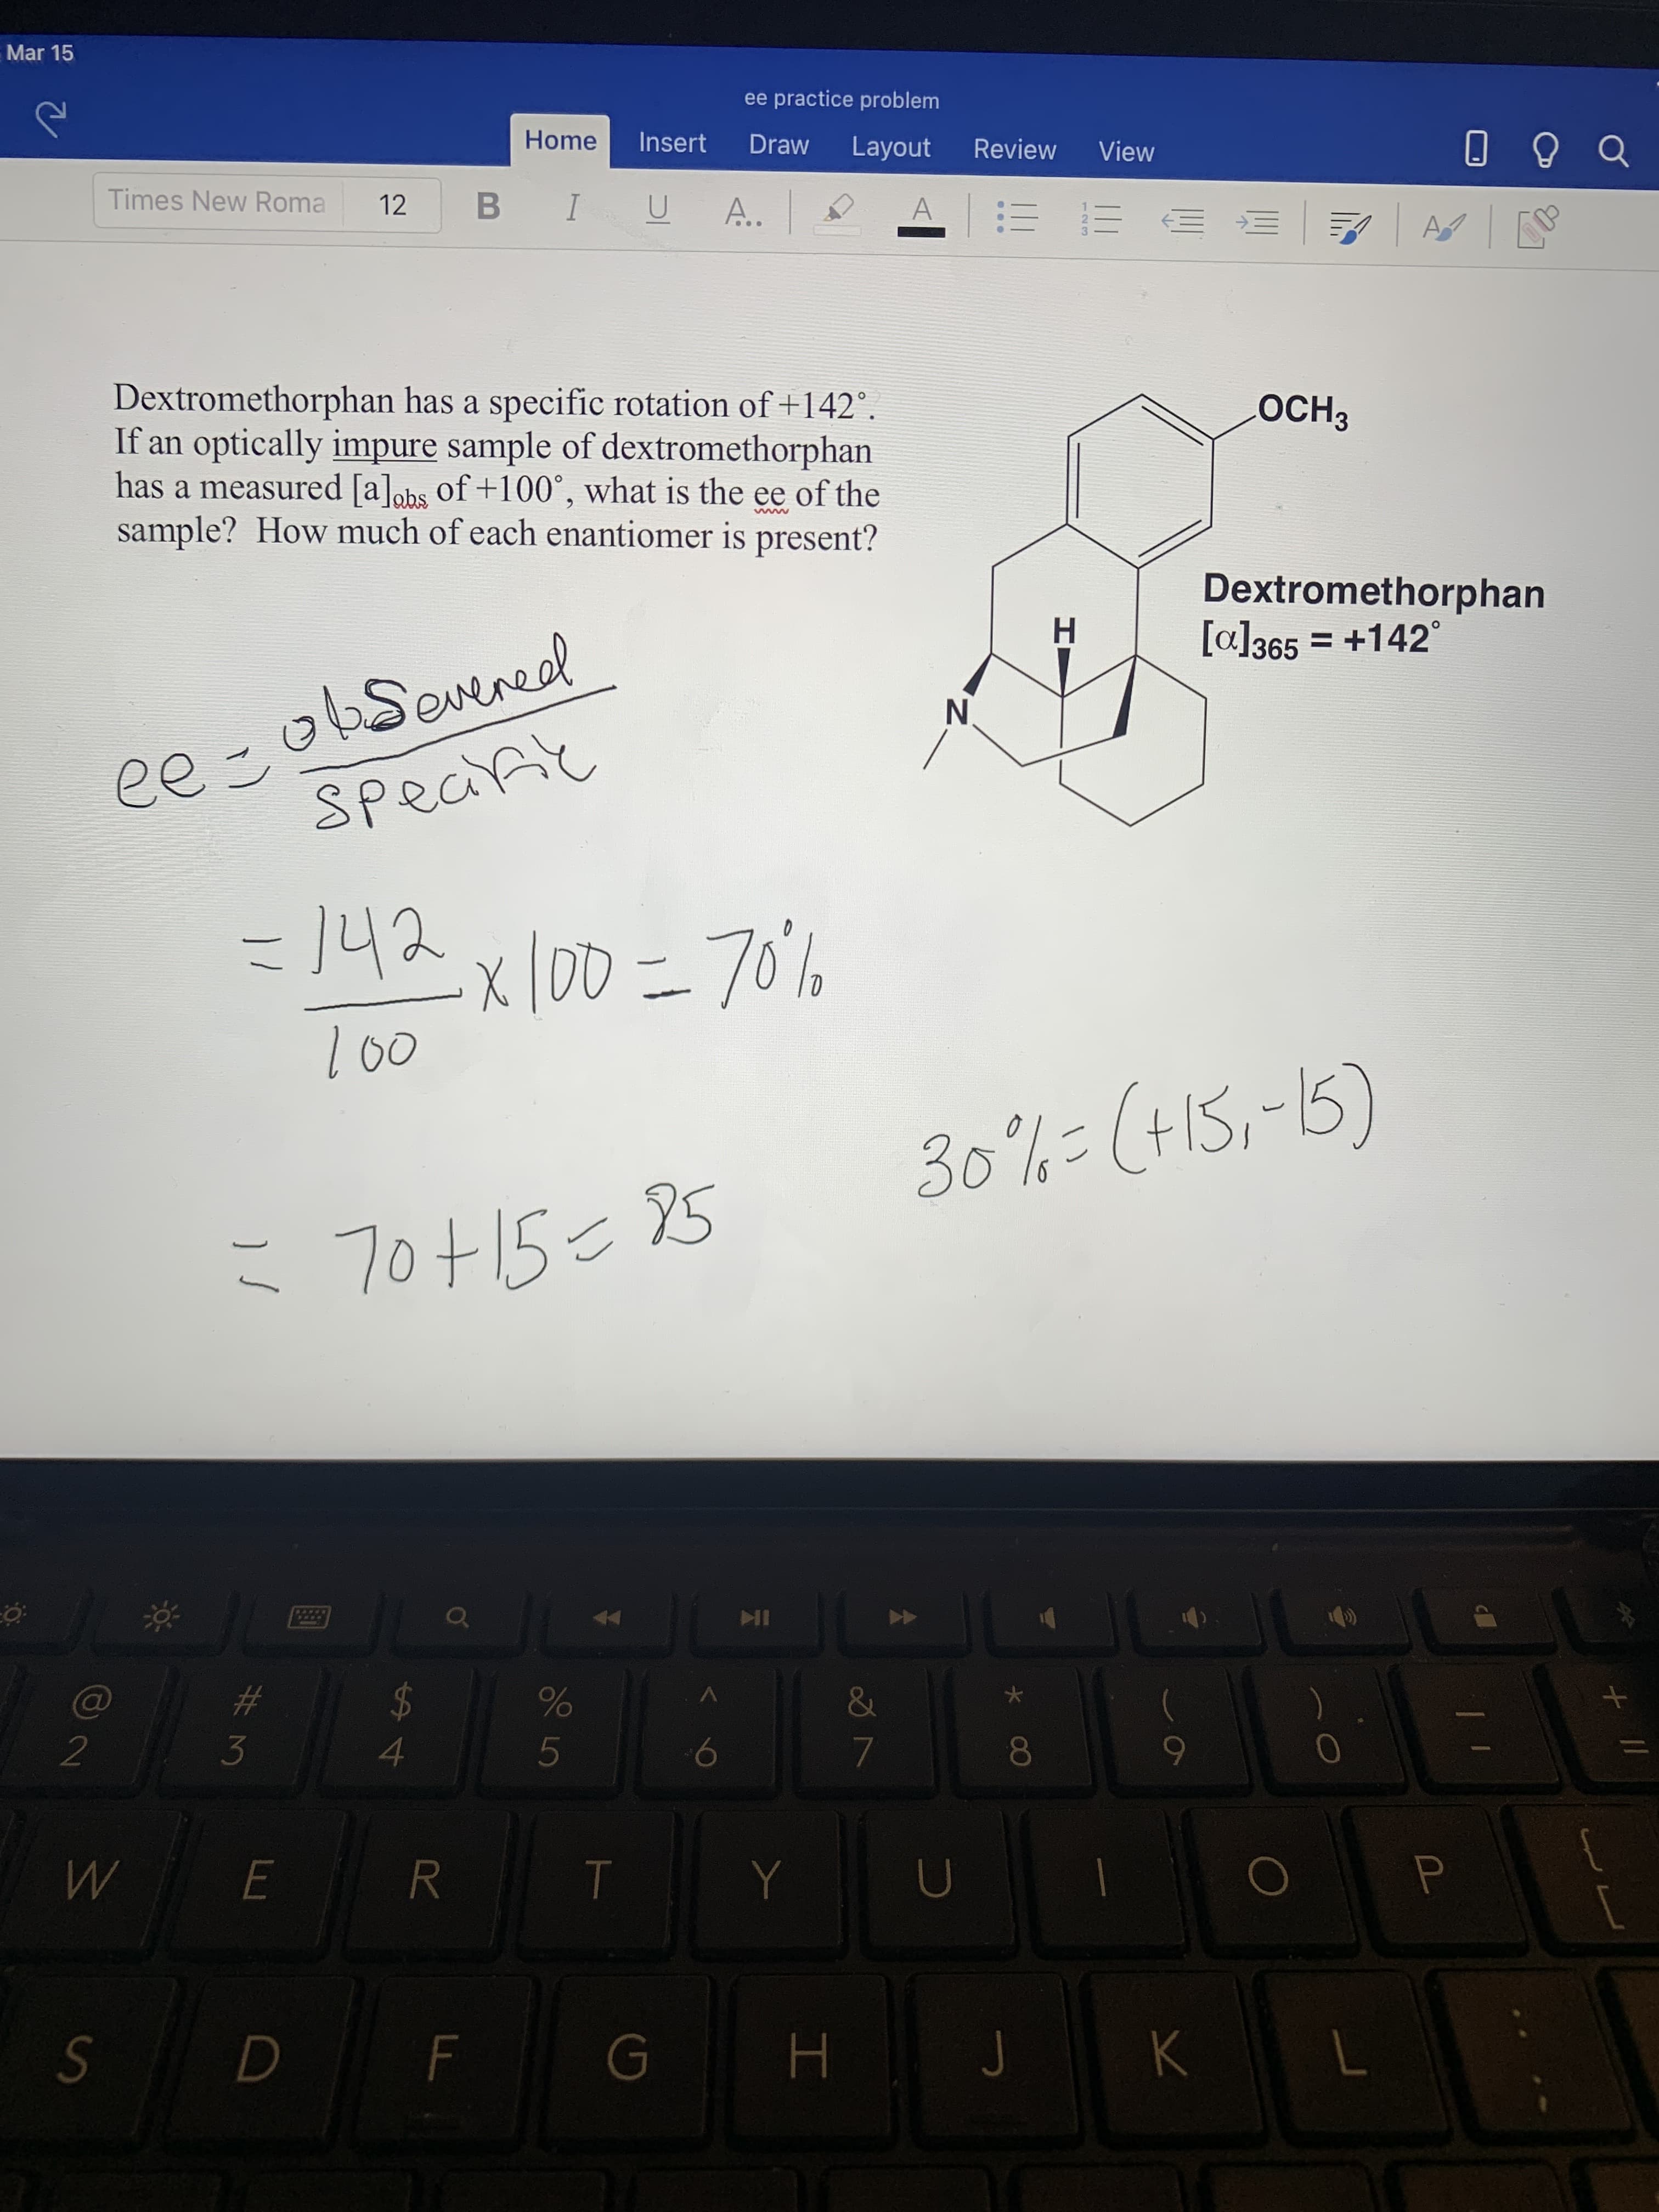 Dextromethorphan has a specific rotation of +142°.
If an optically impure sample of dextromethorphan
has a measured [a]obs of +100°, what is the ee of the
sample? How much of each enantiomer is present?
OCH3
Dextromethorphan
[a]365 = +142°
obSevered
Specfic
H.
%3D
ee -
